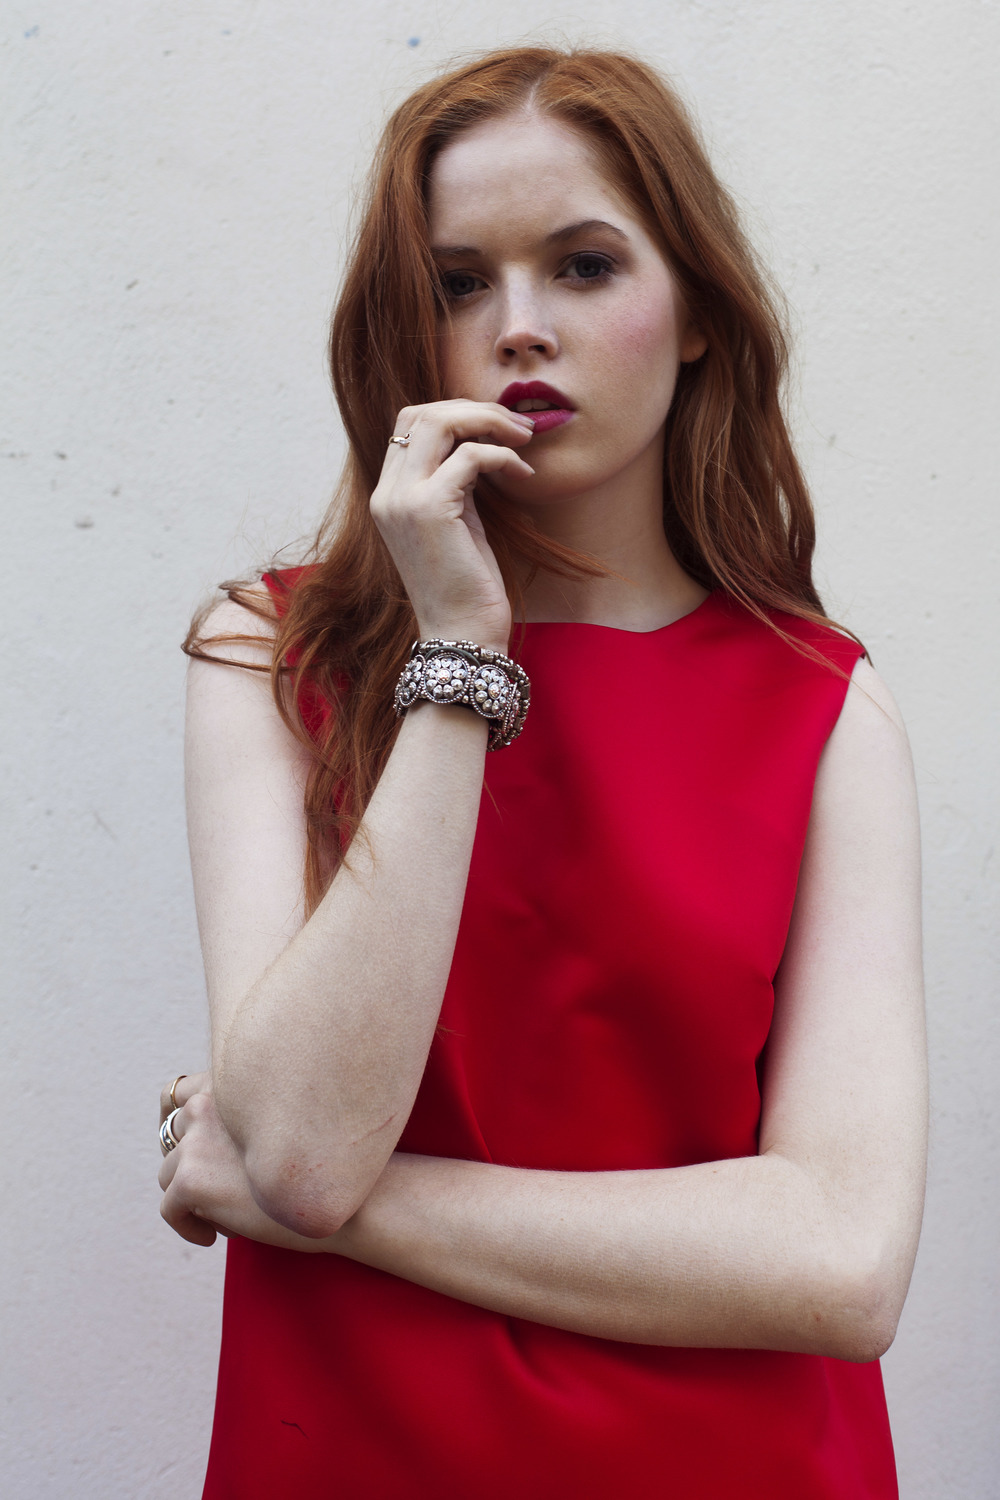 Ellie Bamber Pics, Celebrity Collection